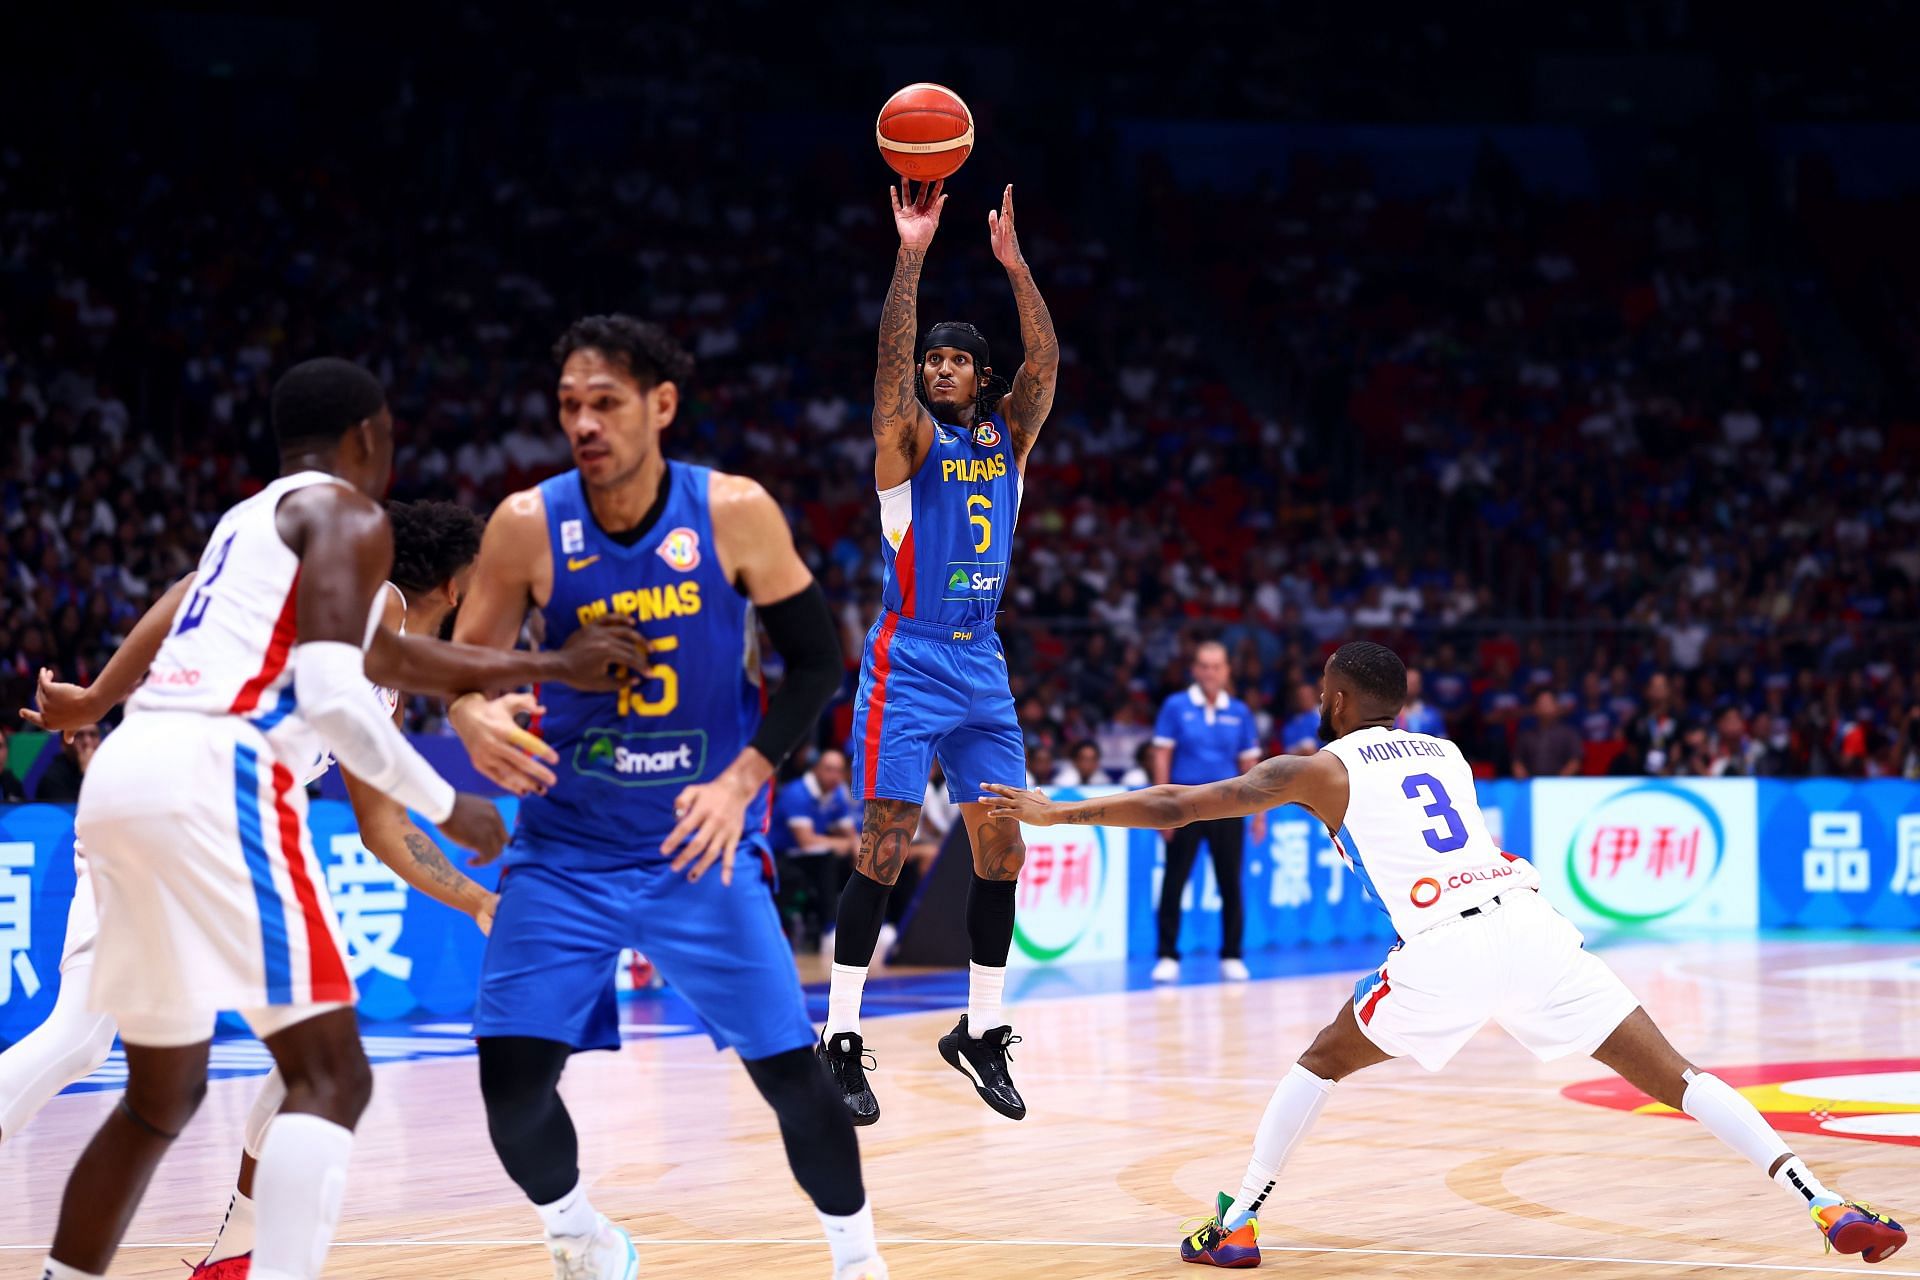 How can the Philippines qualify for the next round at FIBA World Cup 2023